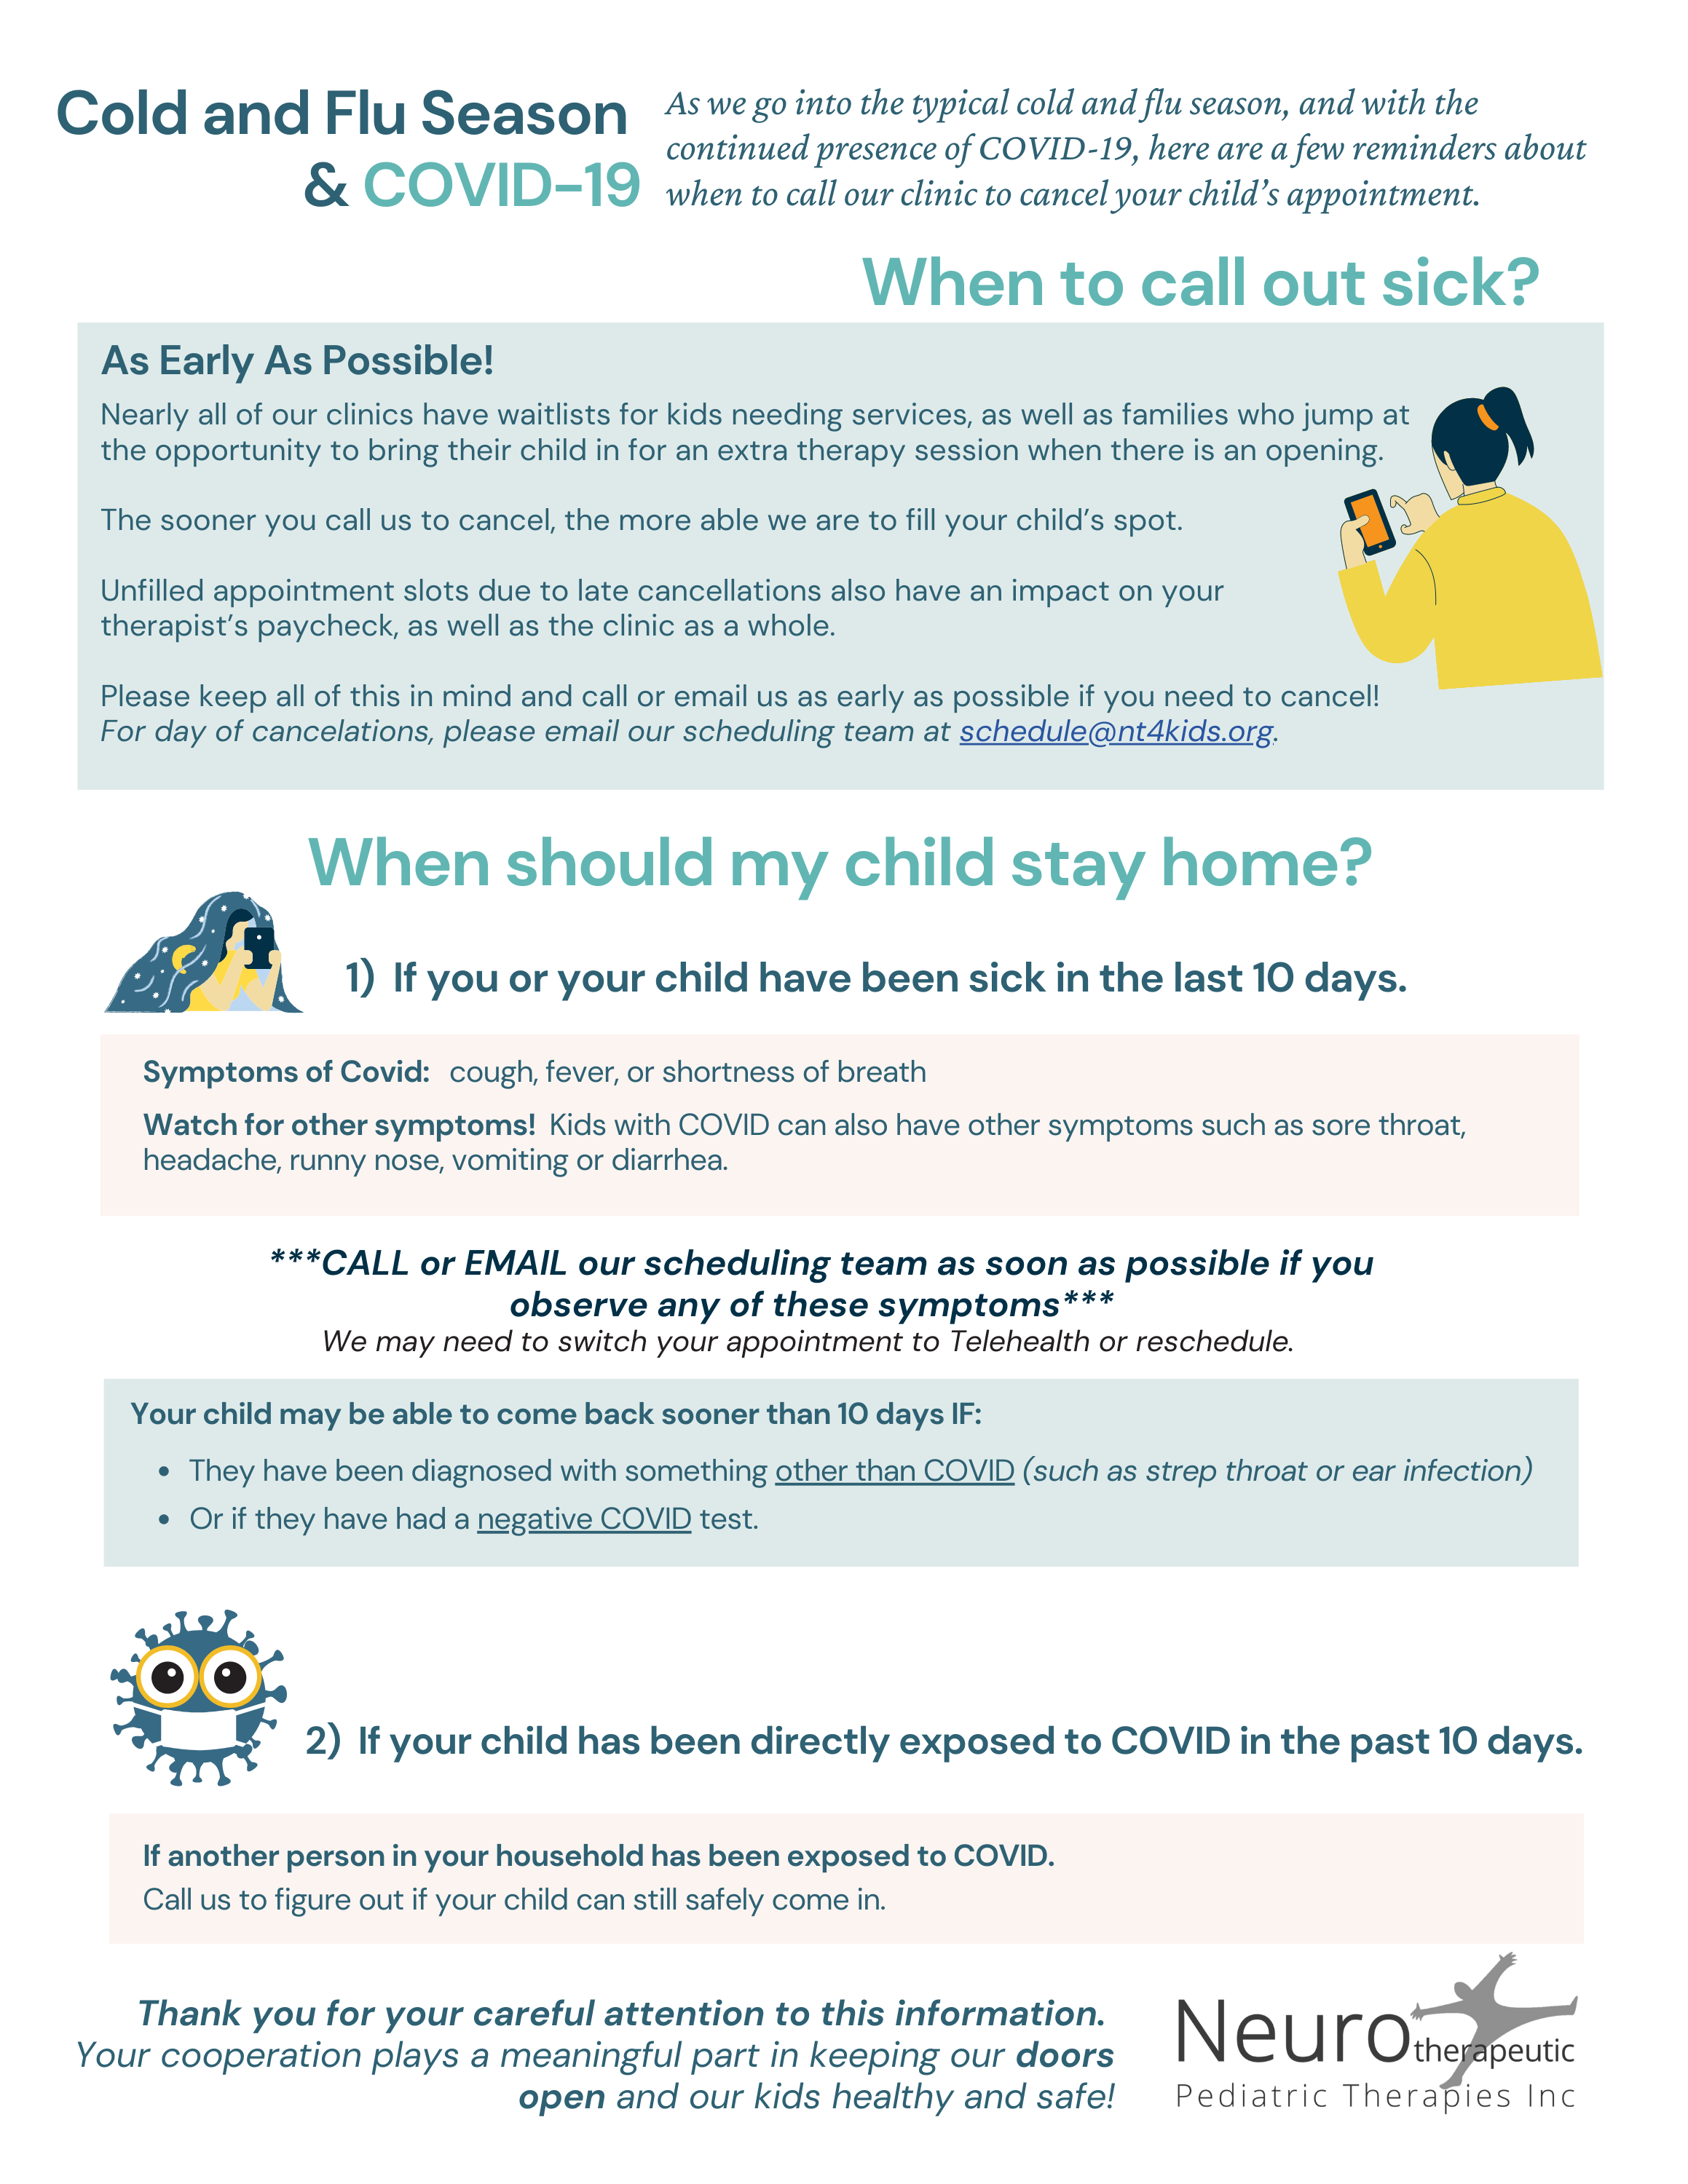 When to Call Out Sick - Covid-19